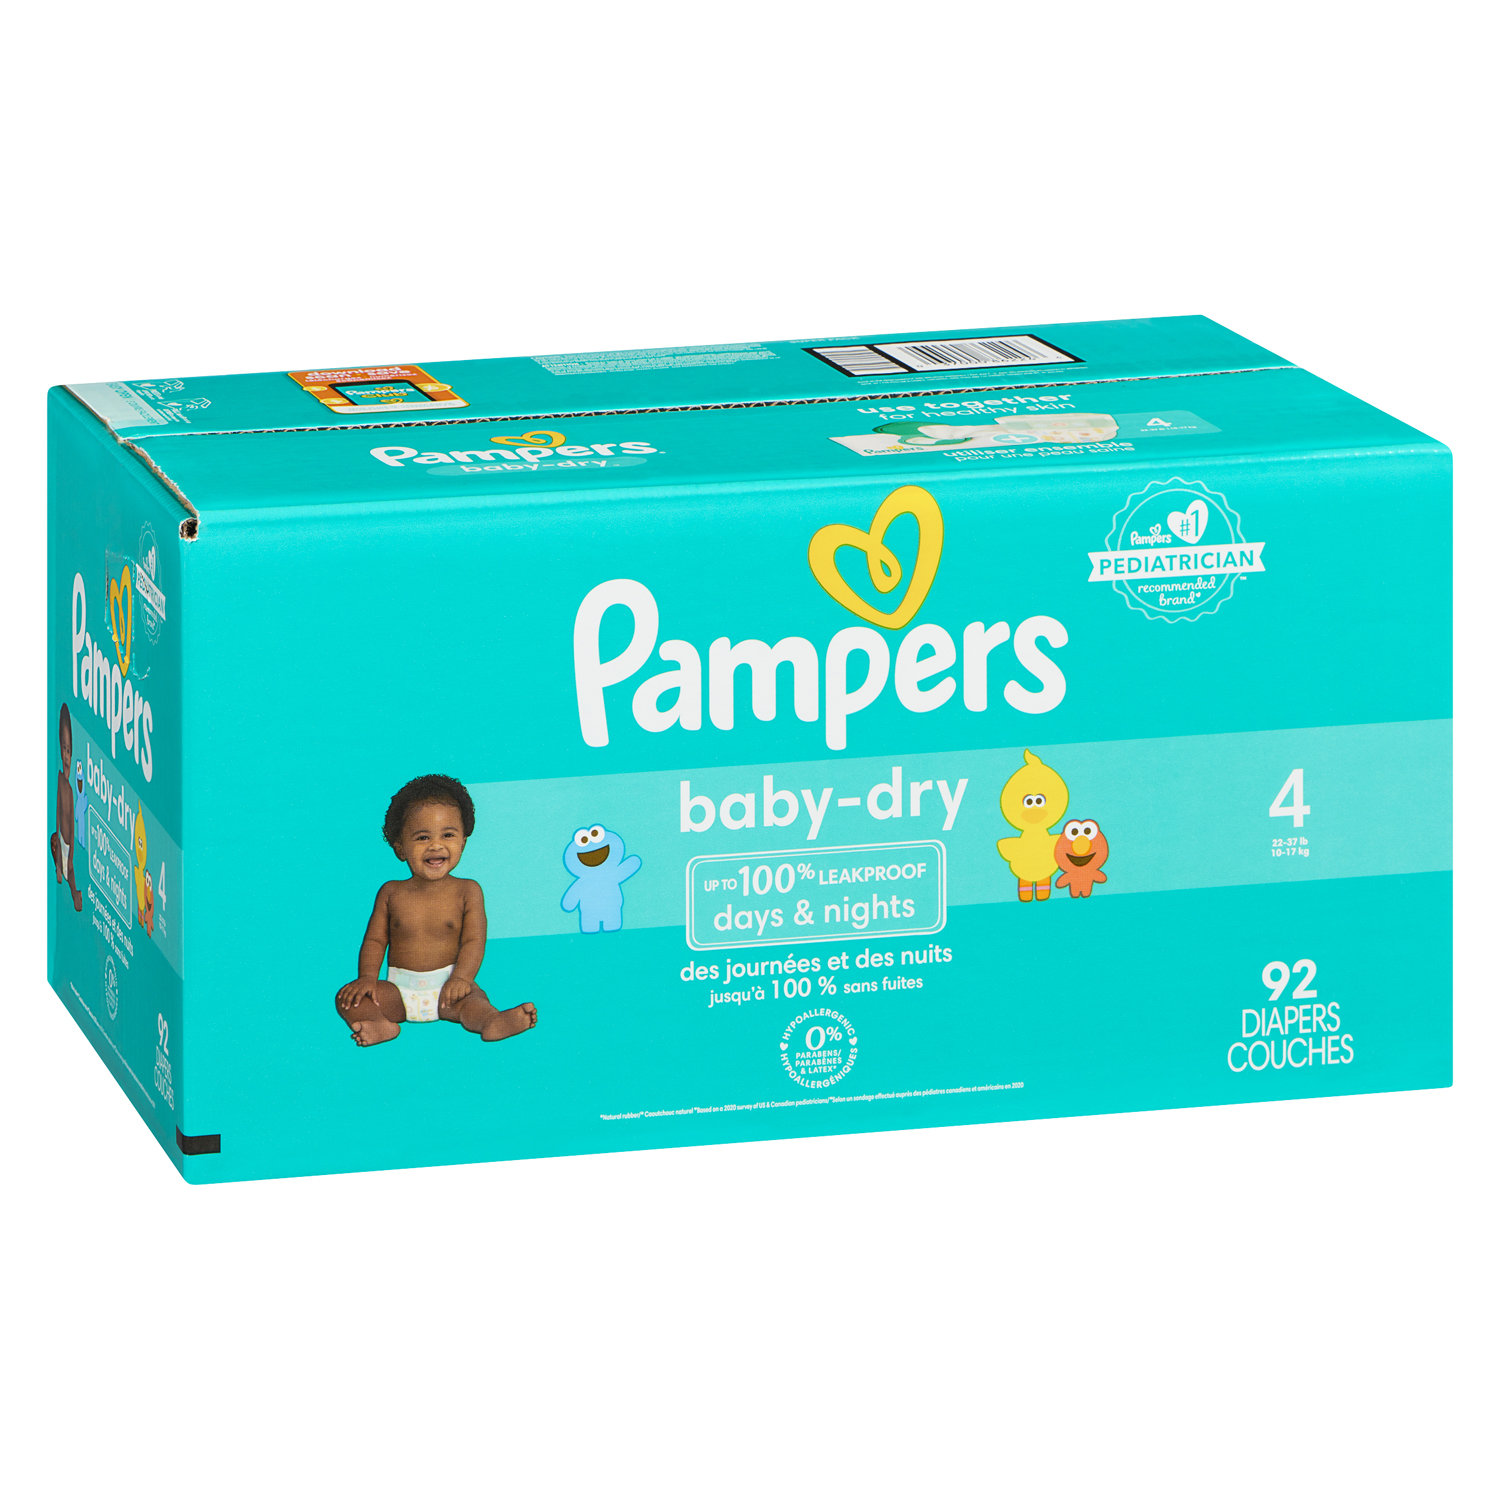 Pampers - Easy Ups Training Underwear 3T-4T - Save-On-Foods